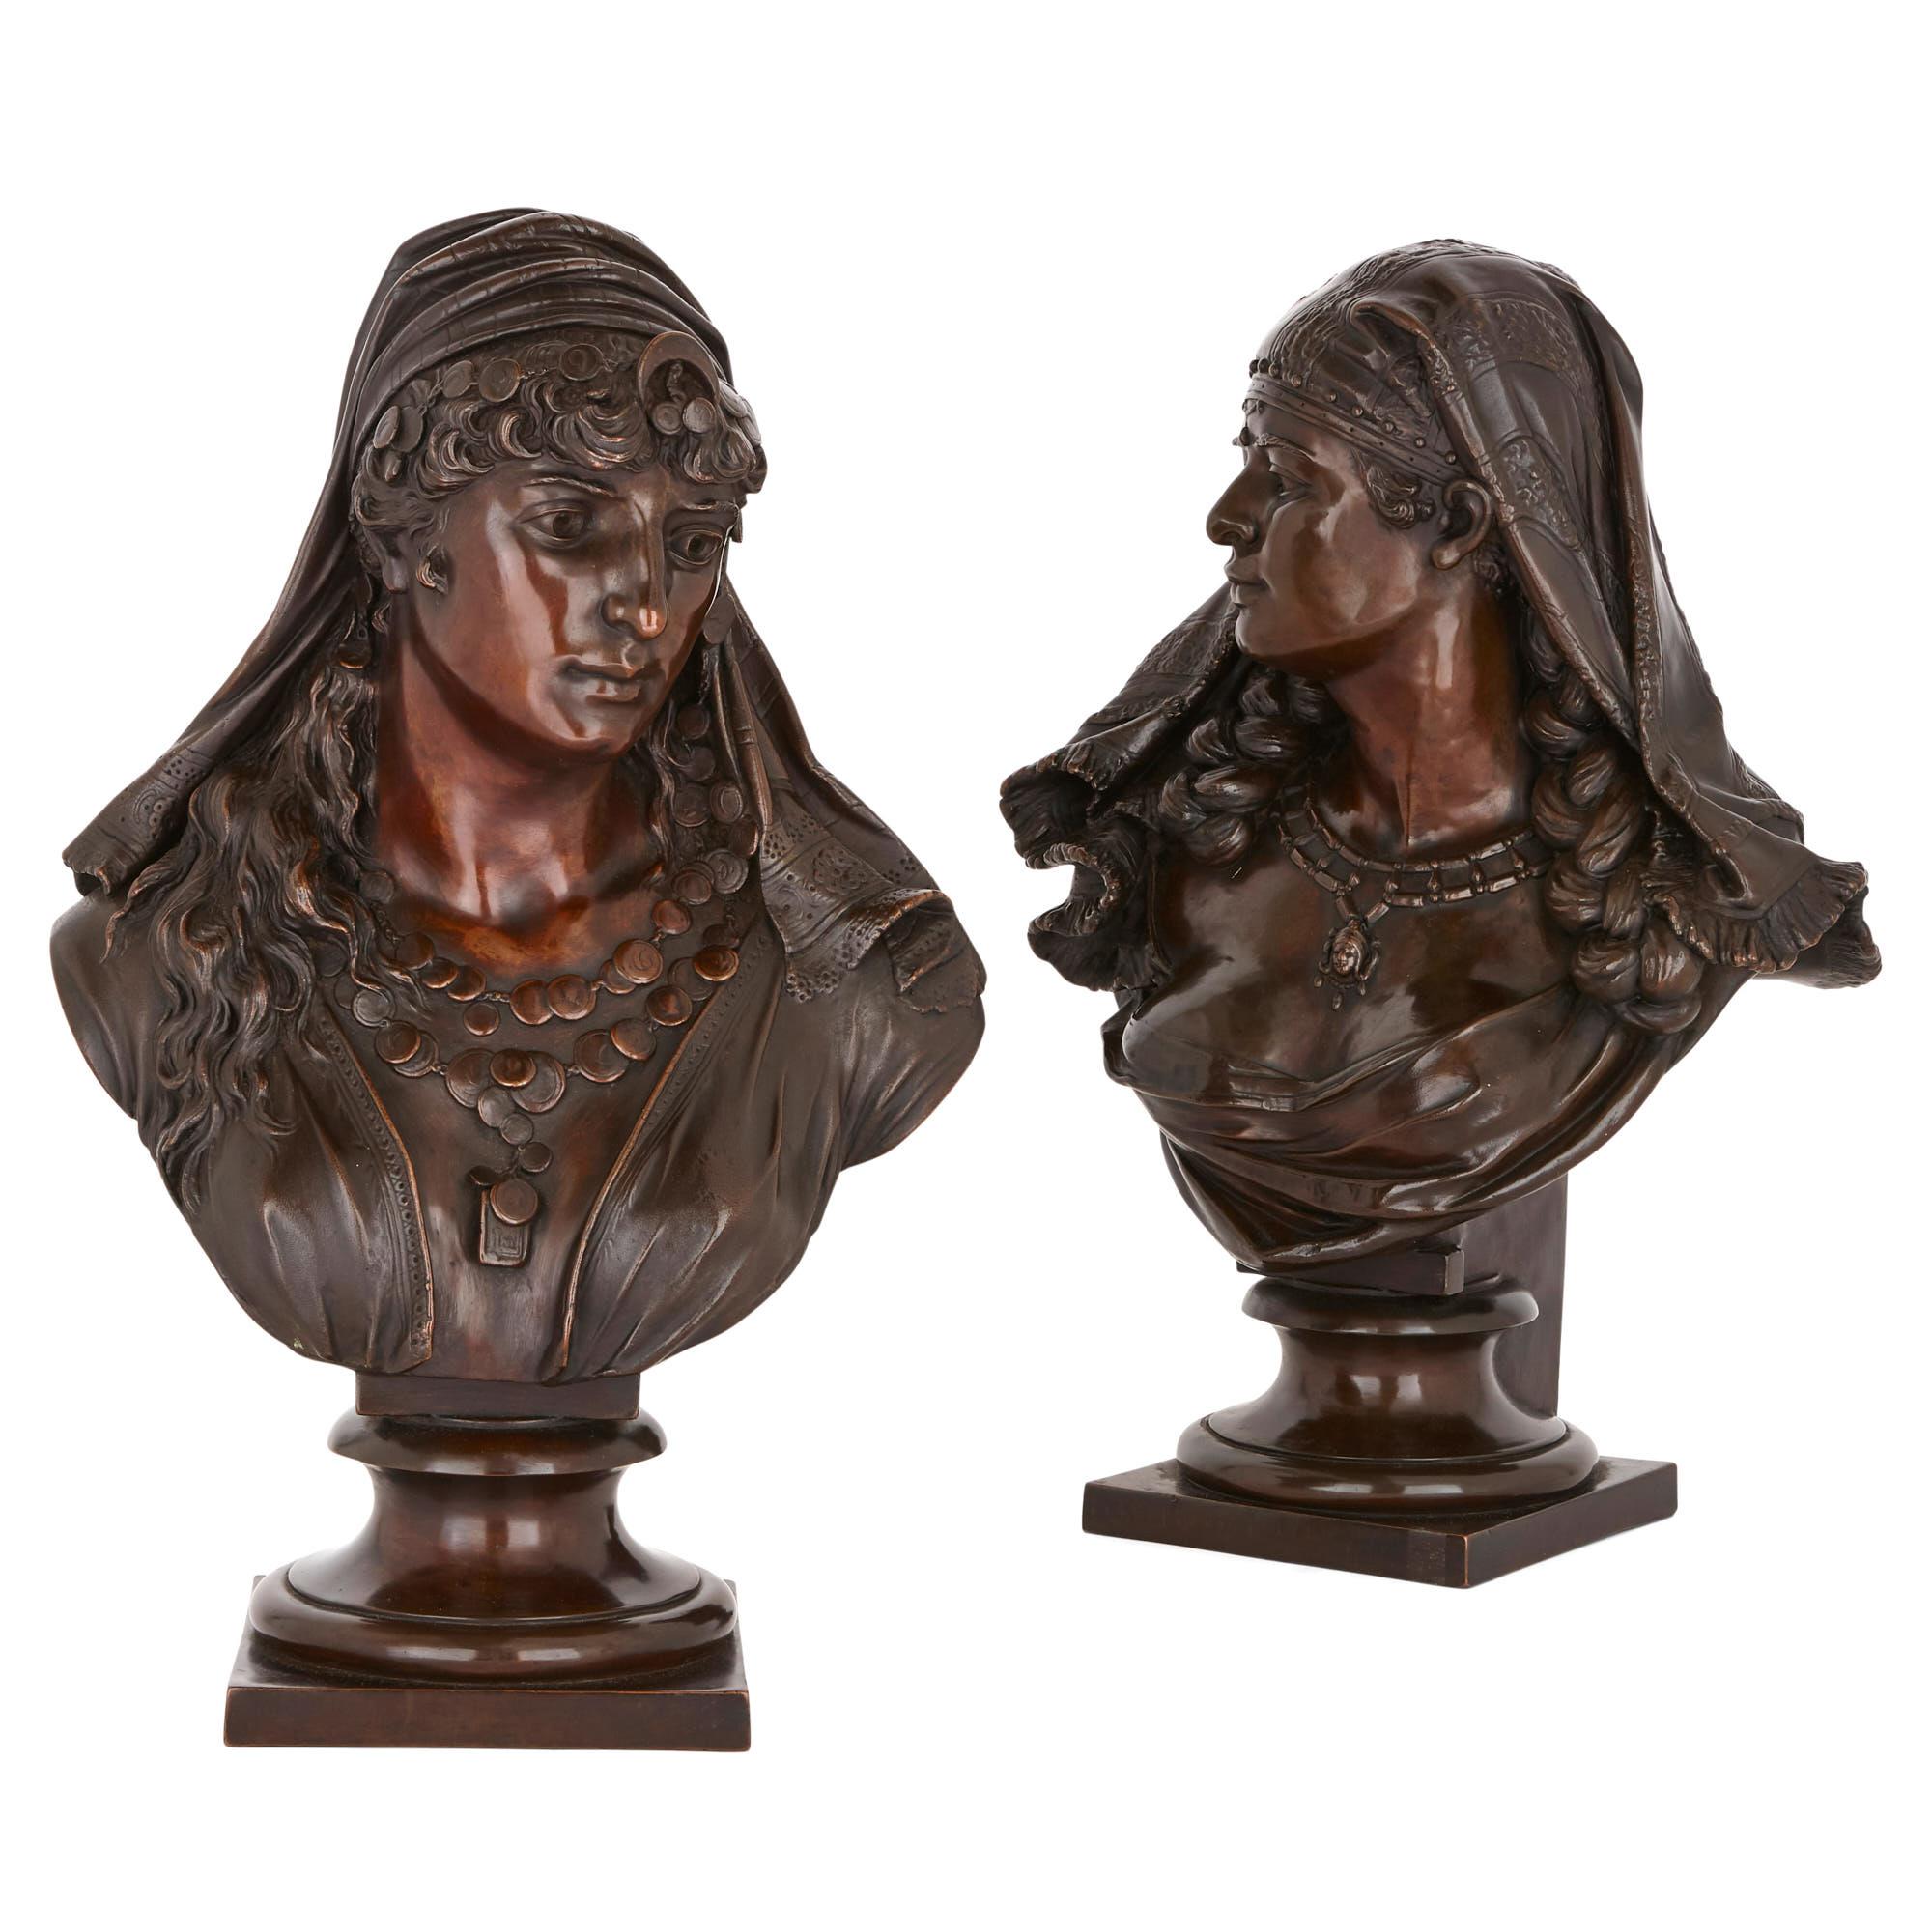 This busts in this pair of spelter sculptures take the form of two Orientalist female figures. The figures wear Orientalist clothing and are embellished with Orientalist-style jewelry about their necks and heads. The sculptures are delicately cast